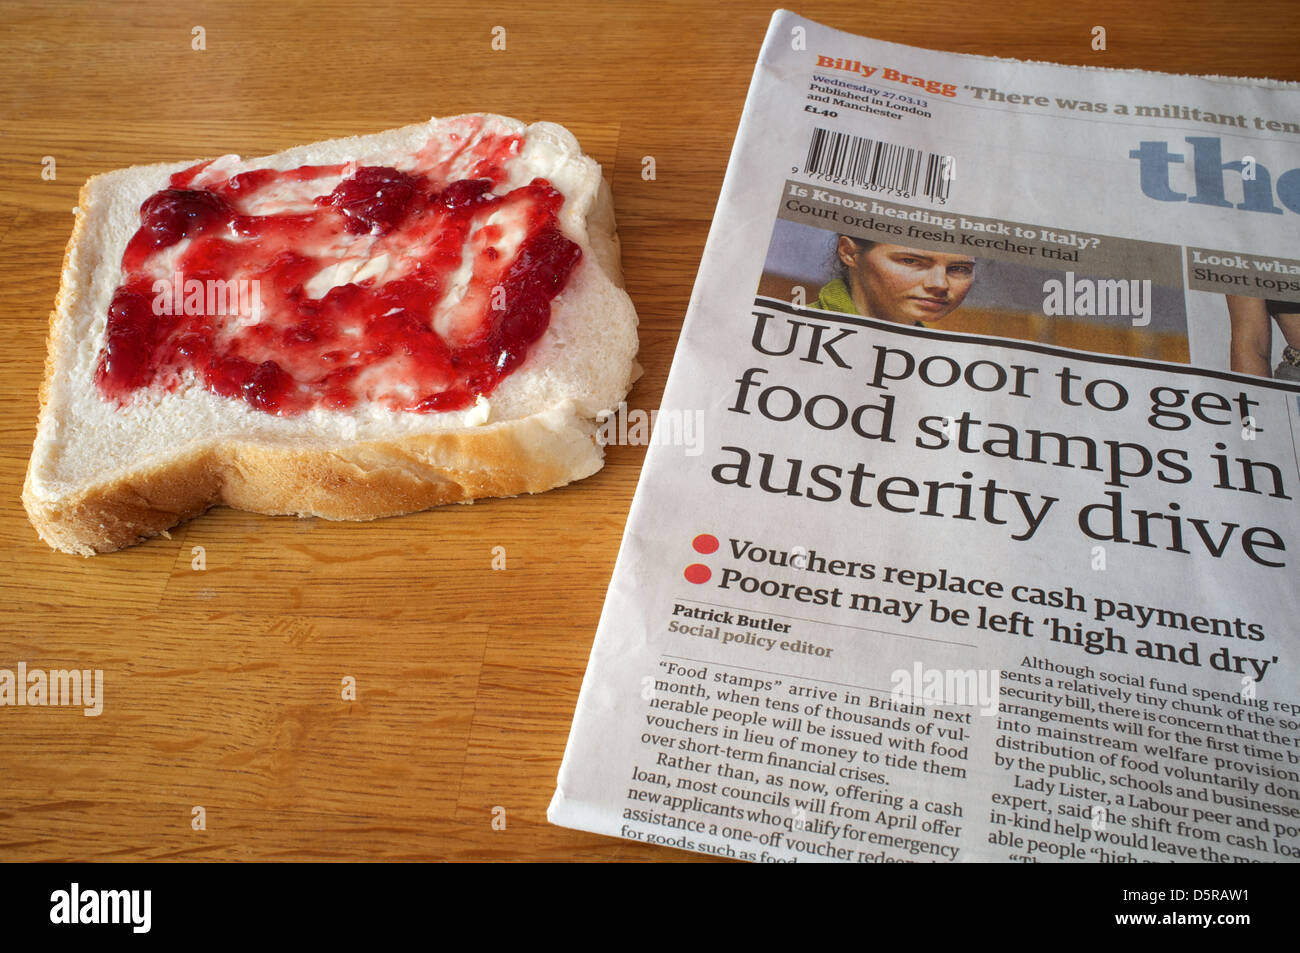 UK poor to get food stamps as reported in The Guardian newspaper on 27.03.2013 Stock Photo